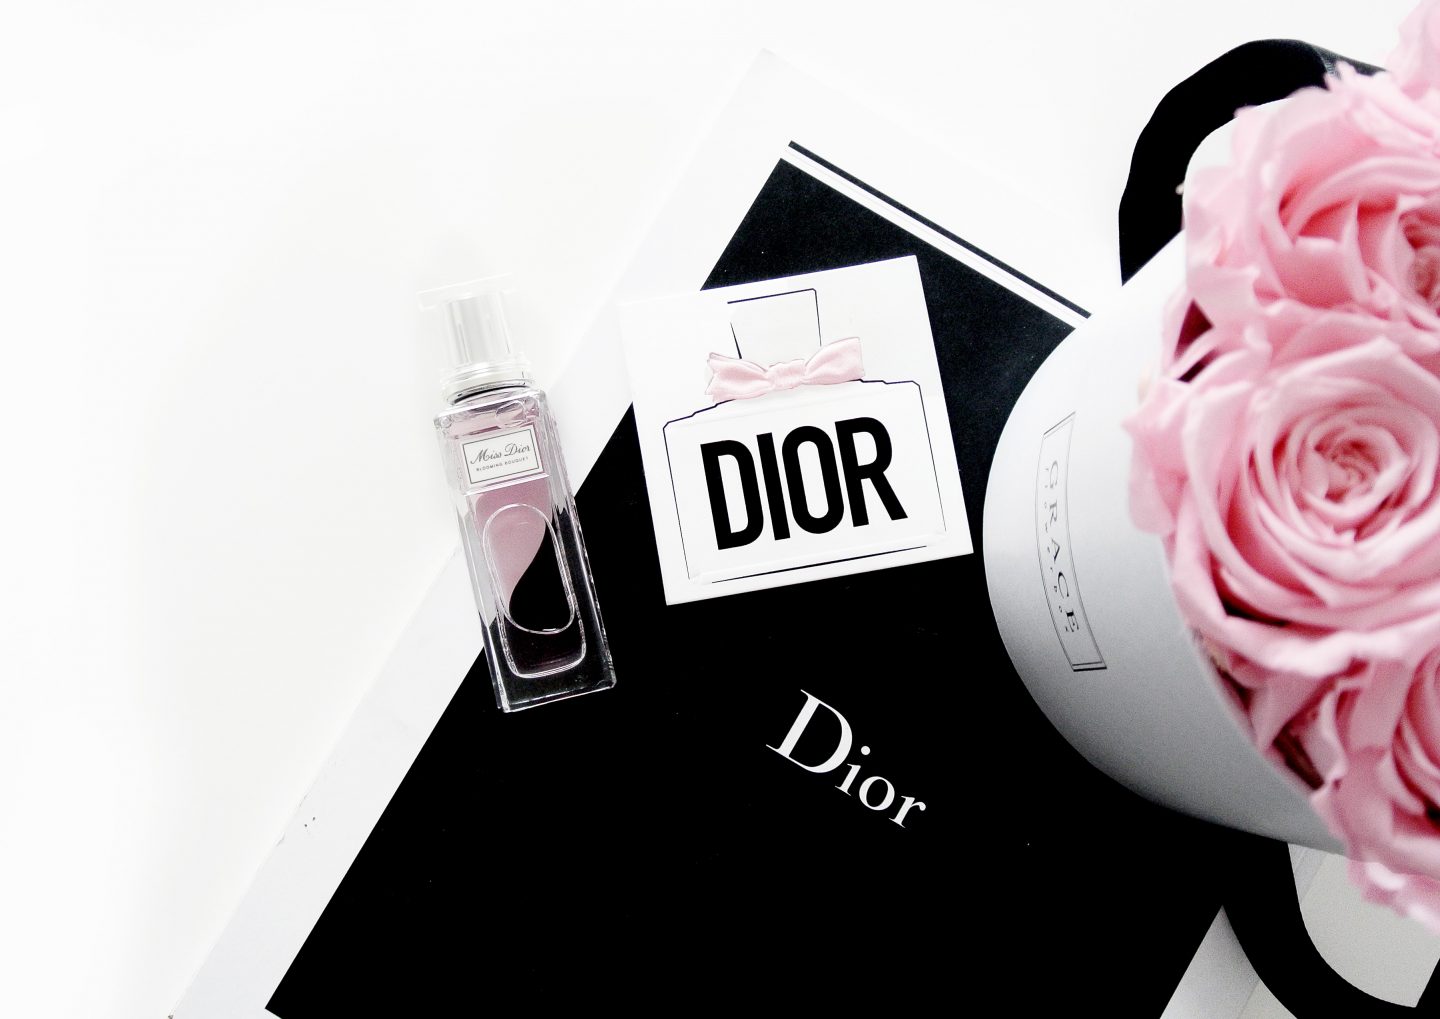 miss dior blooming bouquet basenotes